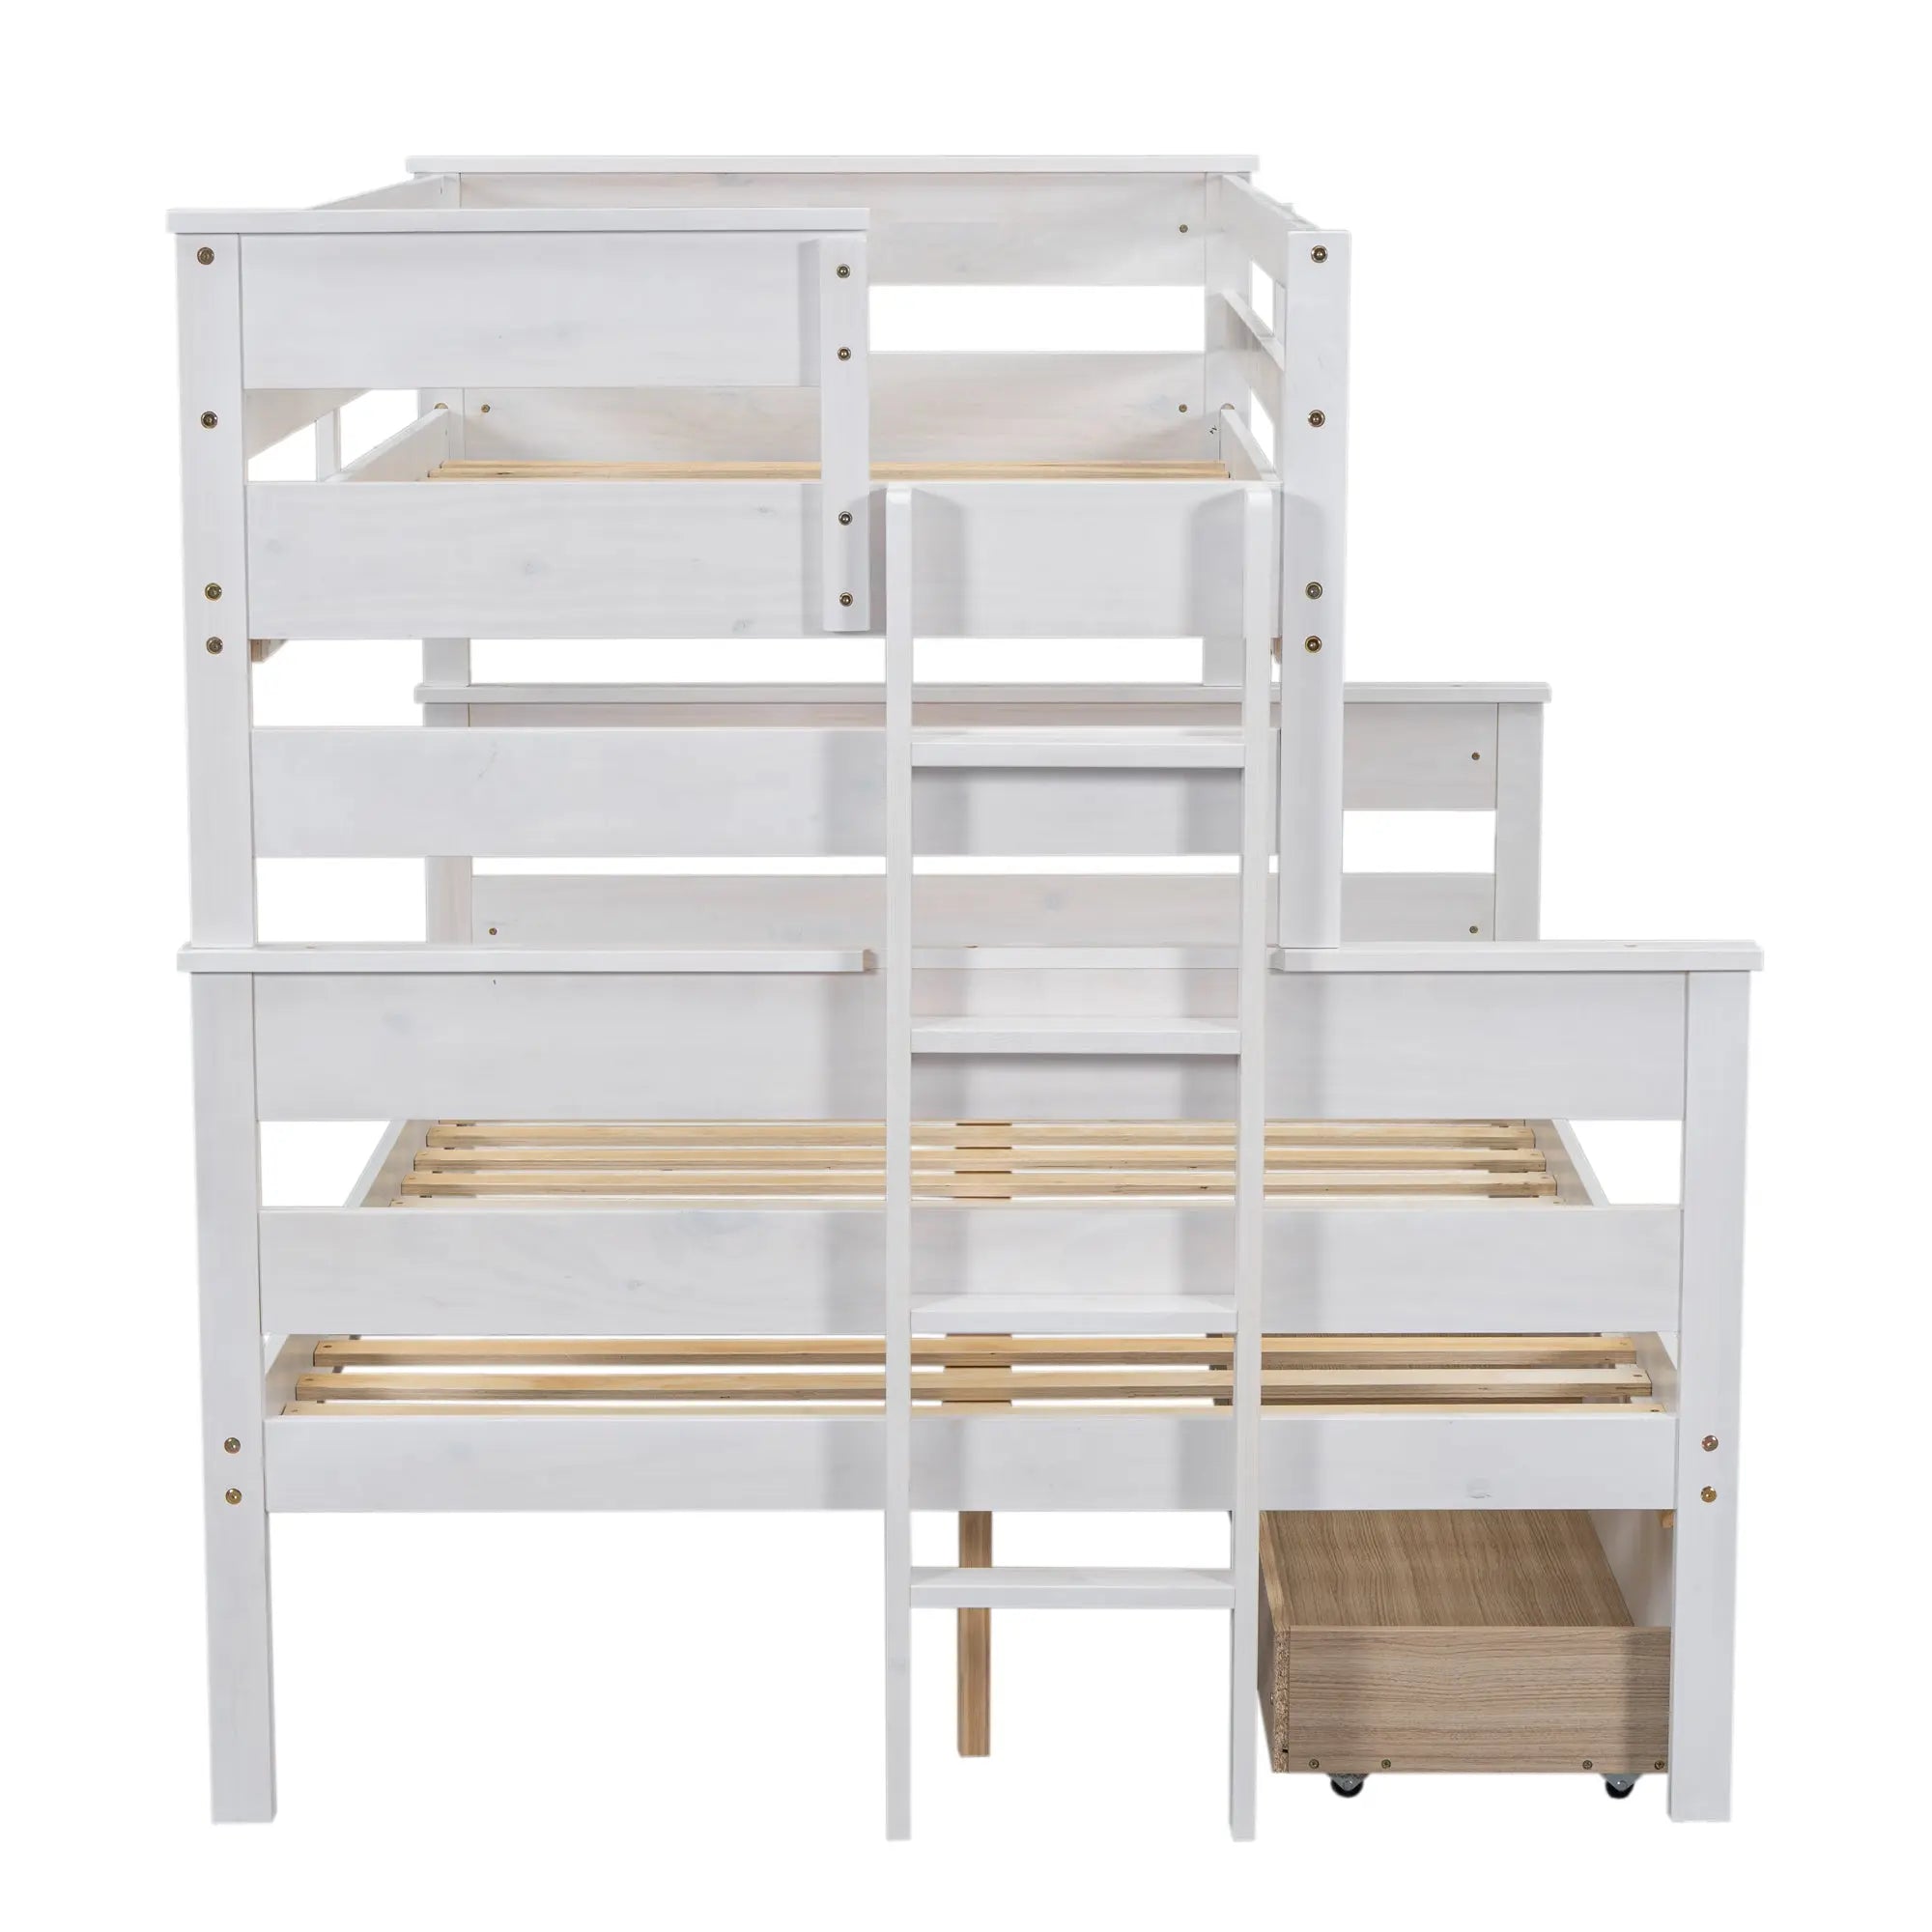 Bellemave® Twin over Full Wood Bunk Bed with 2 Drawers Bellemave®